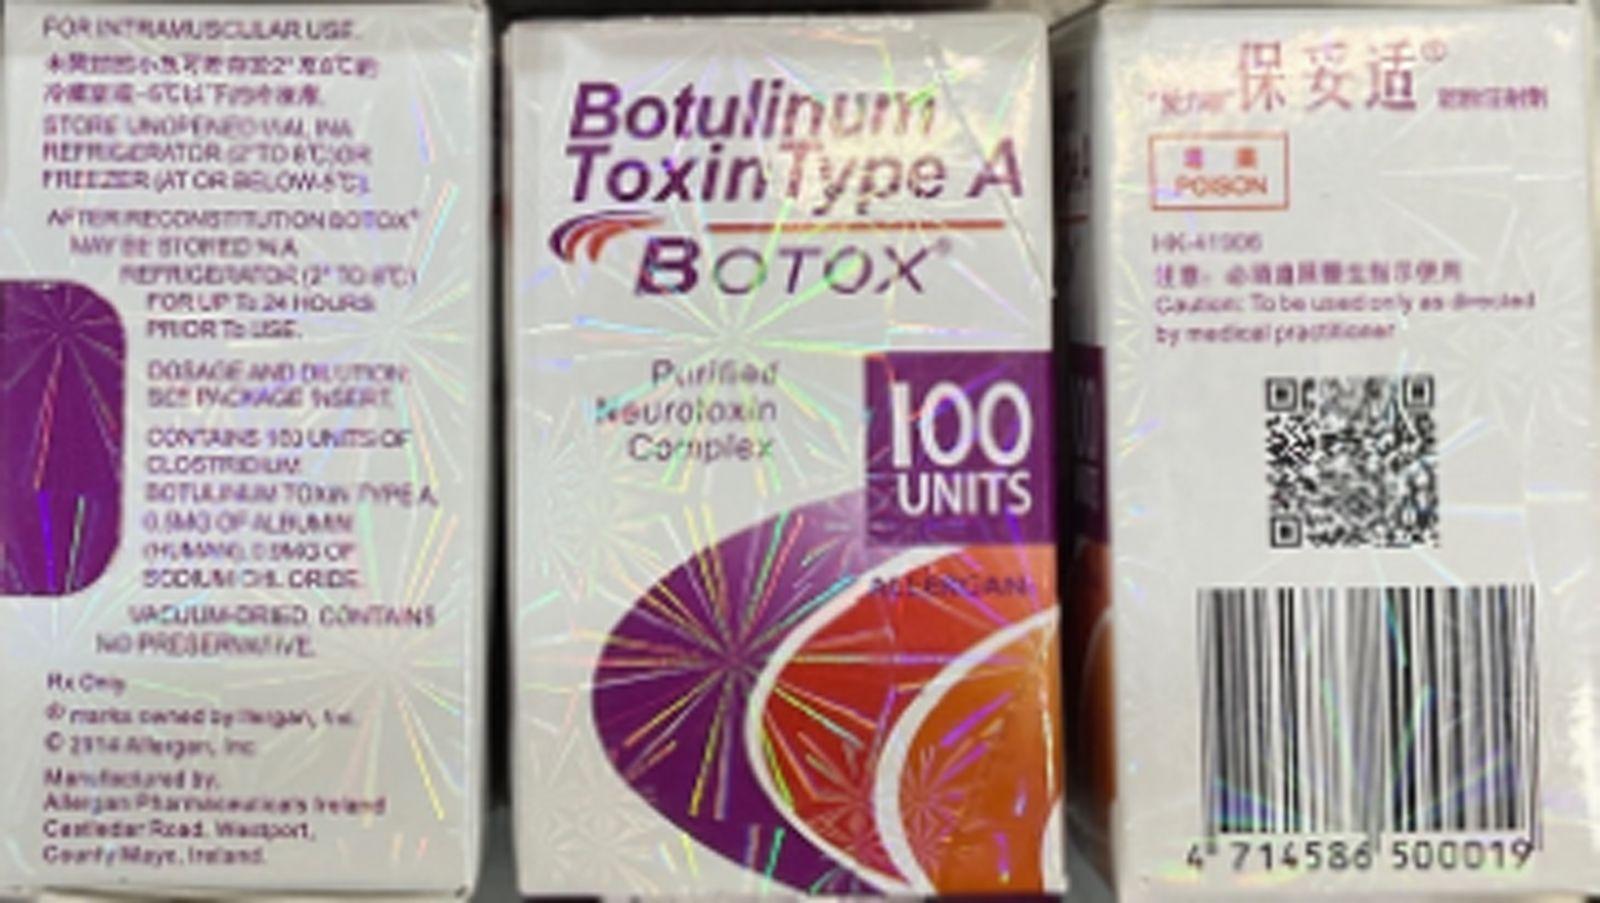 The US Food and Drug Administration is warning that dangerous counterfeit versions of Botox have been identified in multiple states, putting the safety of consumers at risk. (FDA via CNN Newsource)